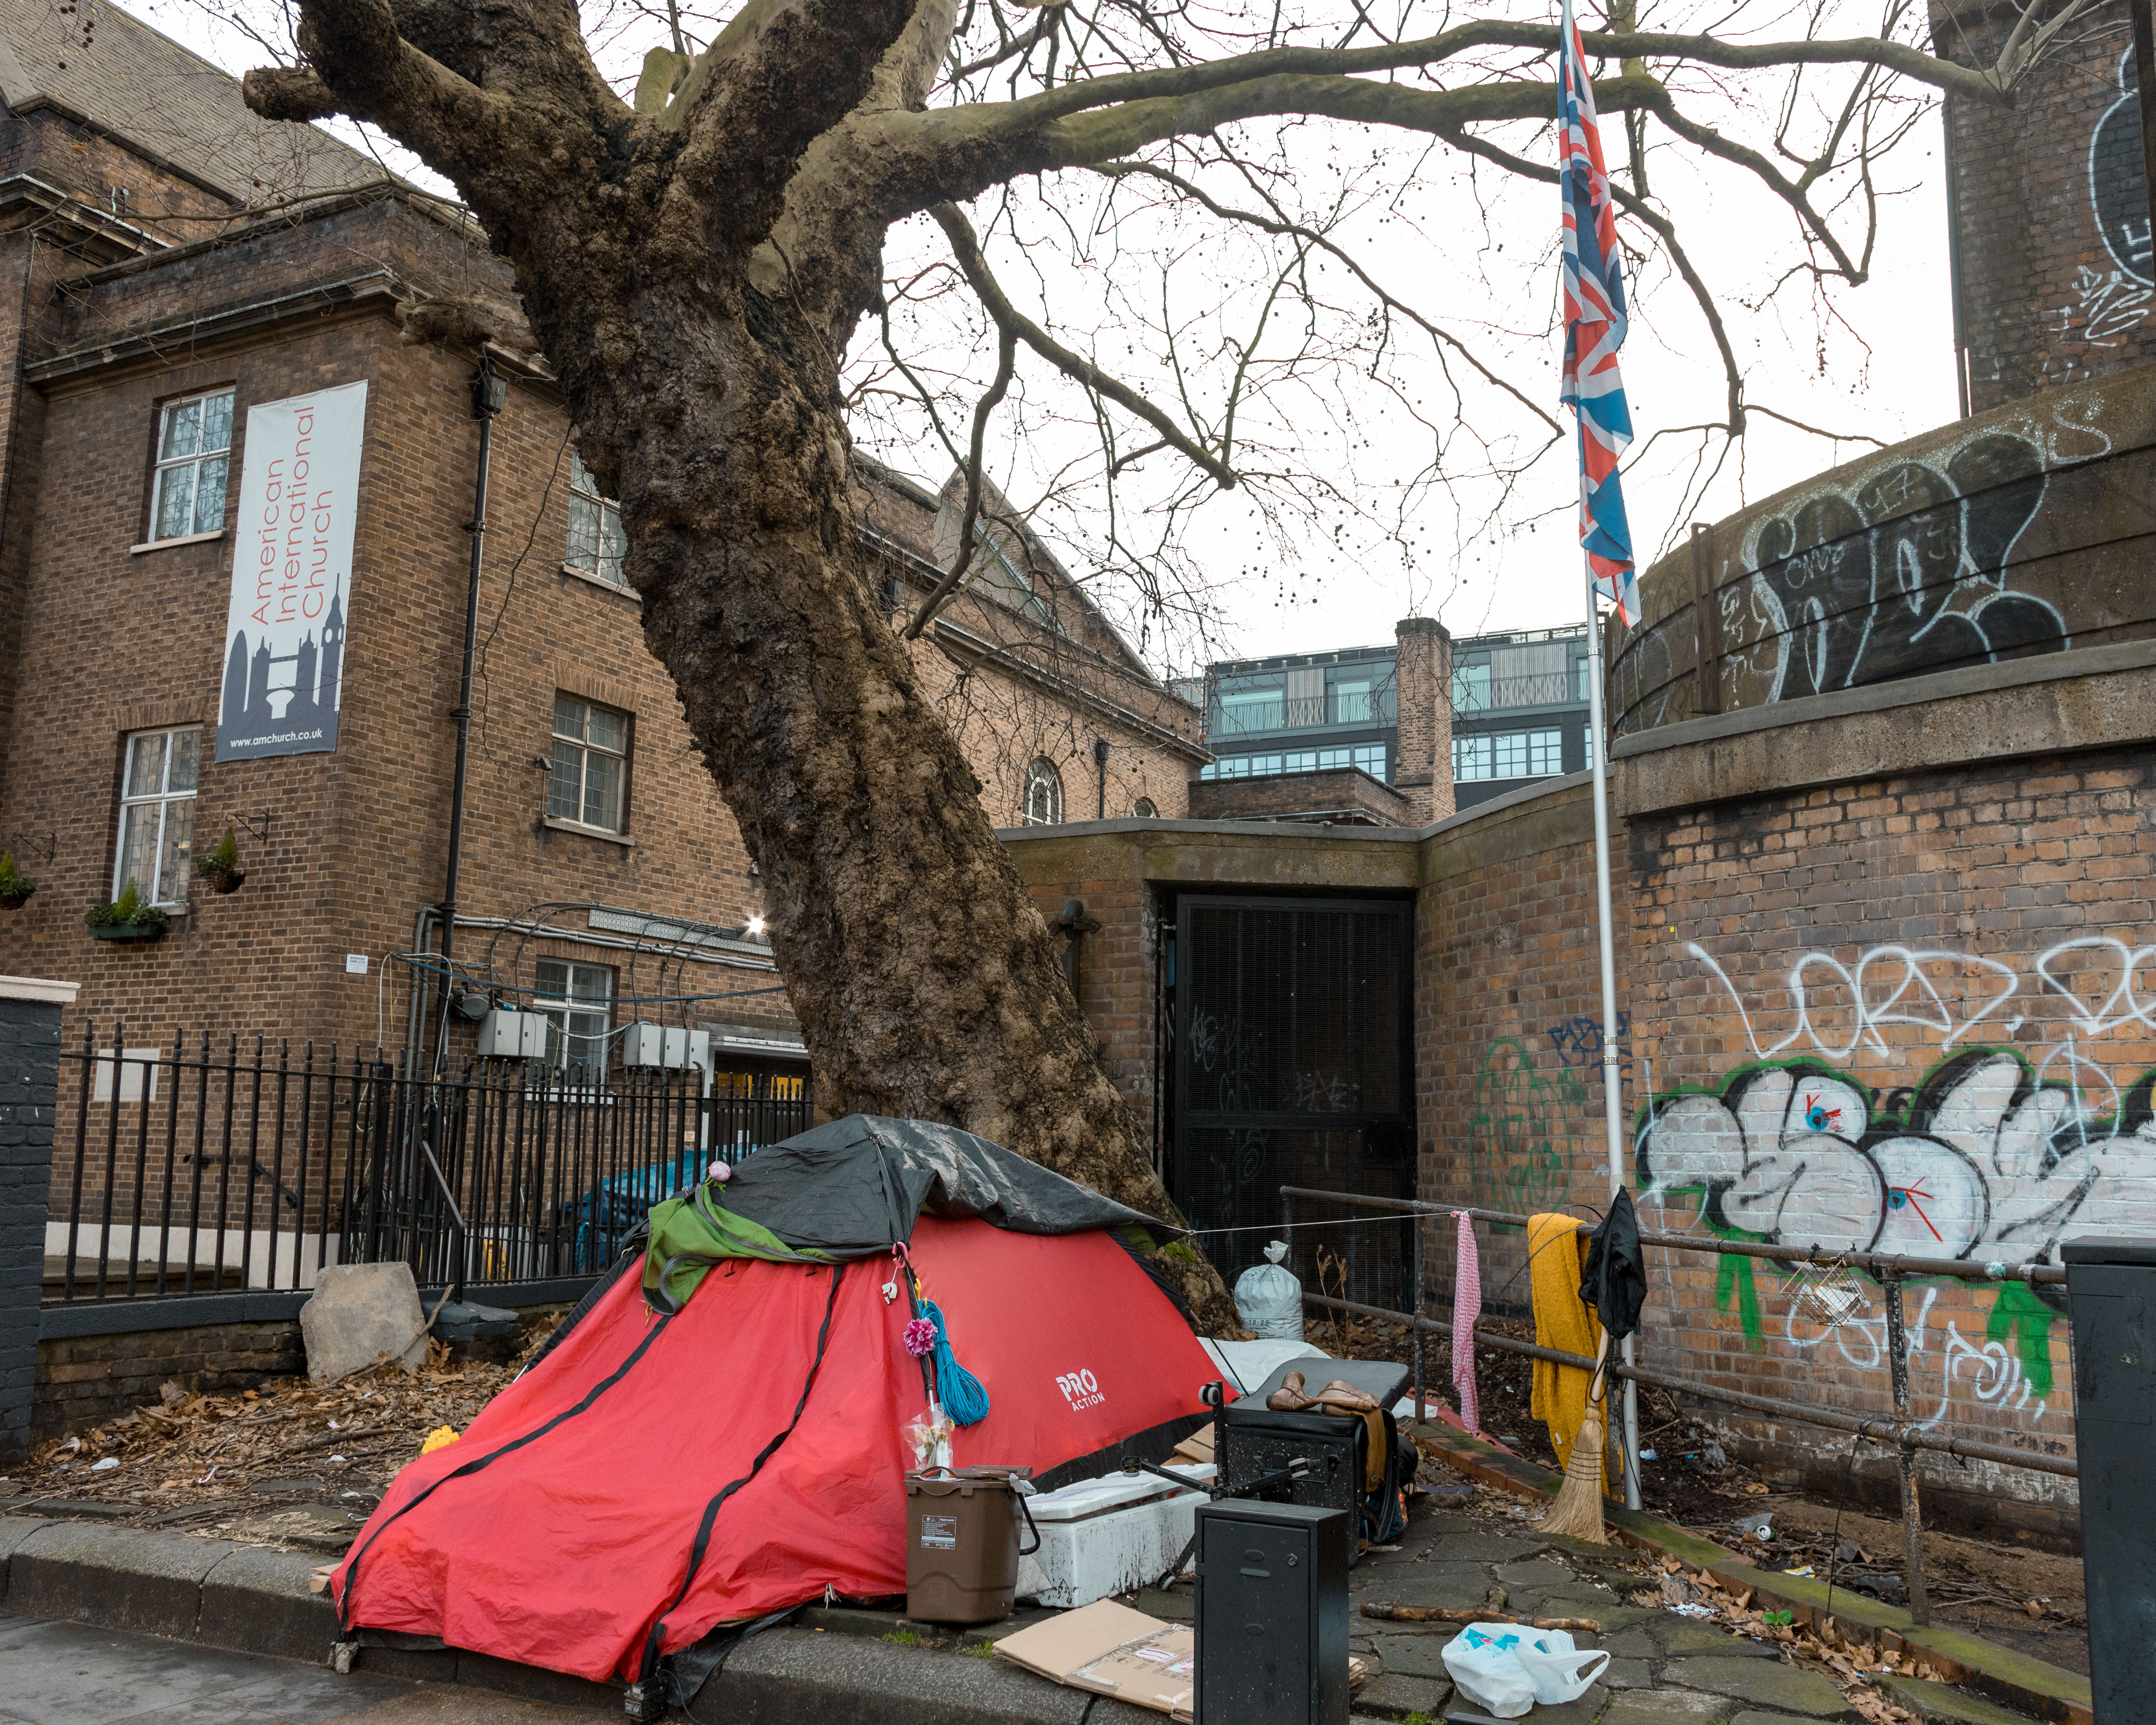 <p>A tent set up of a homeless next to a tree in London. (Photo by Belinda Jiao / SOPA Images/Sipa USA)</p>
